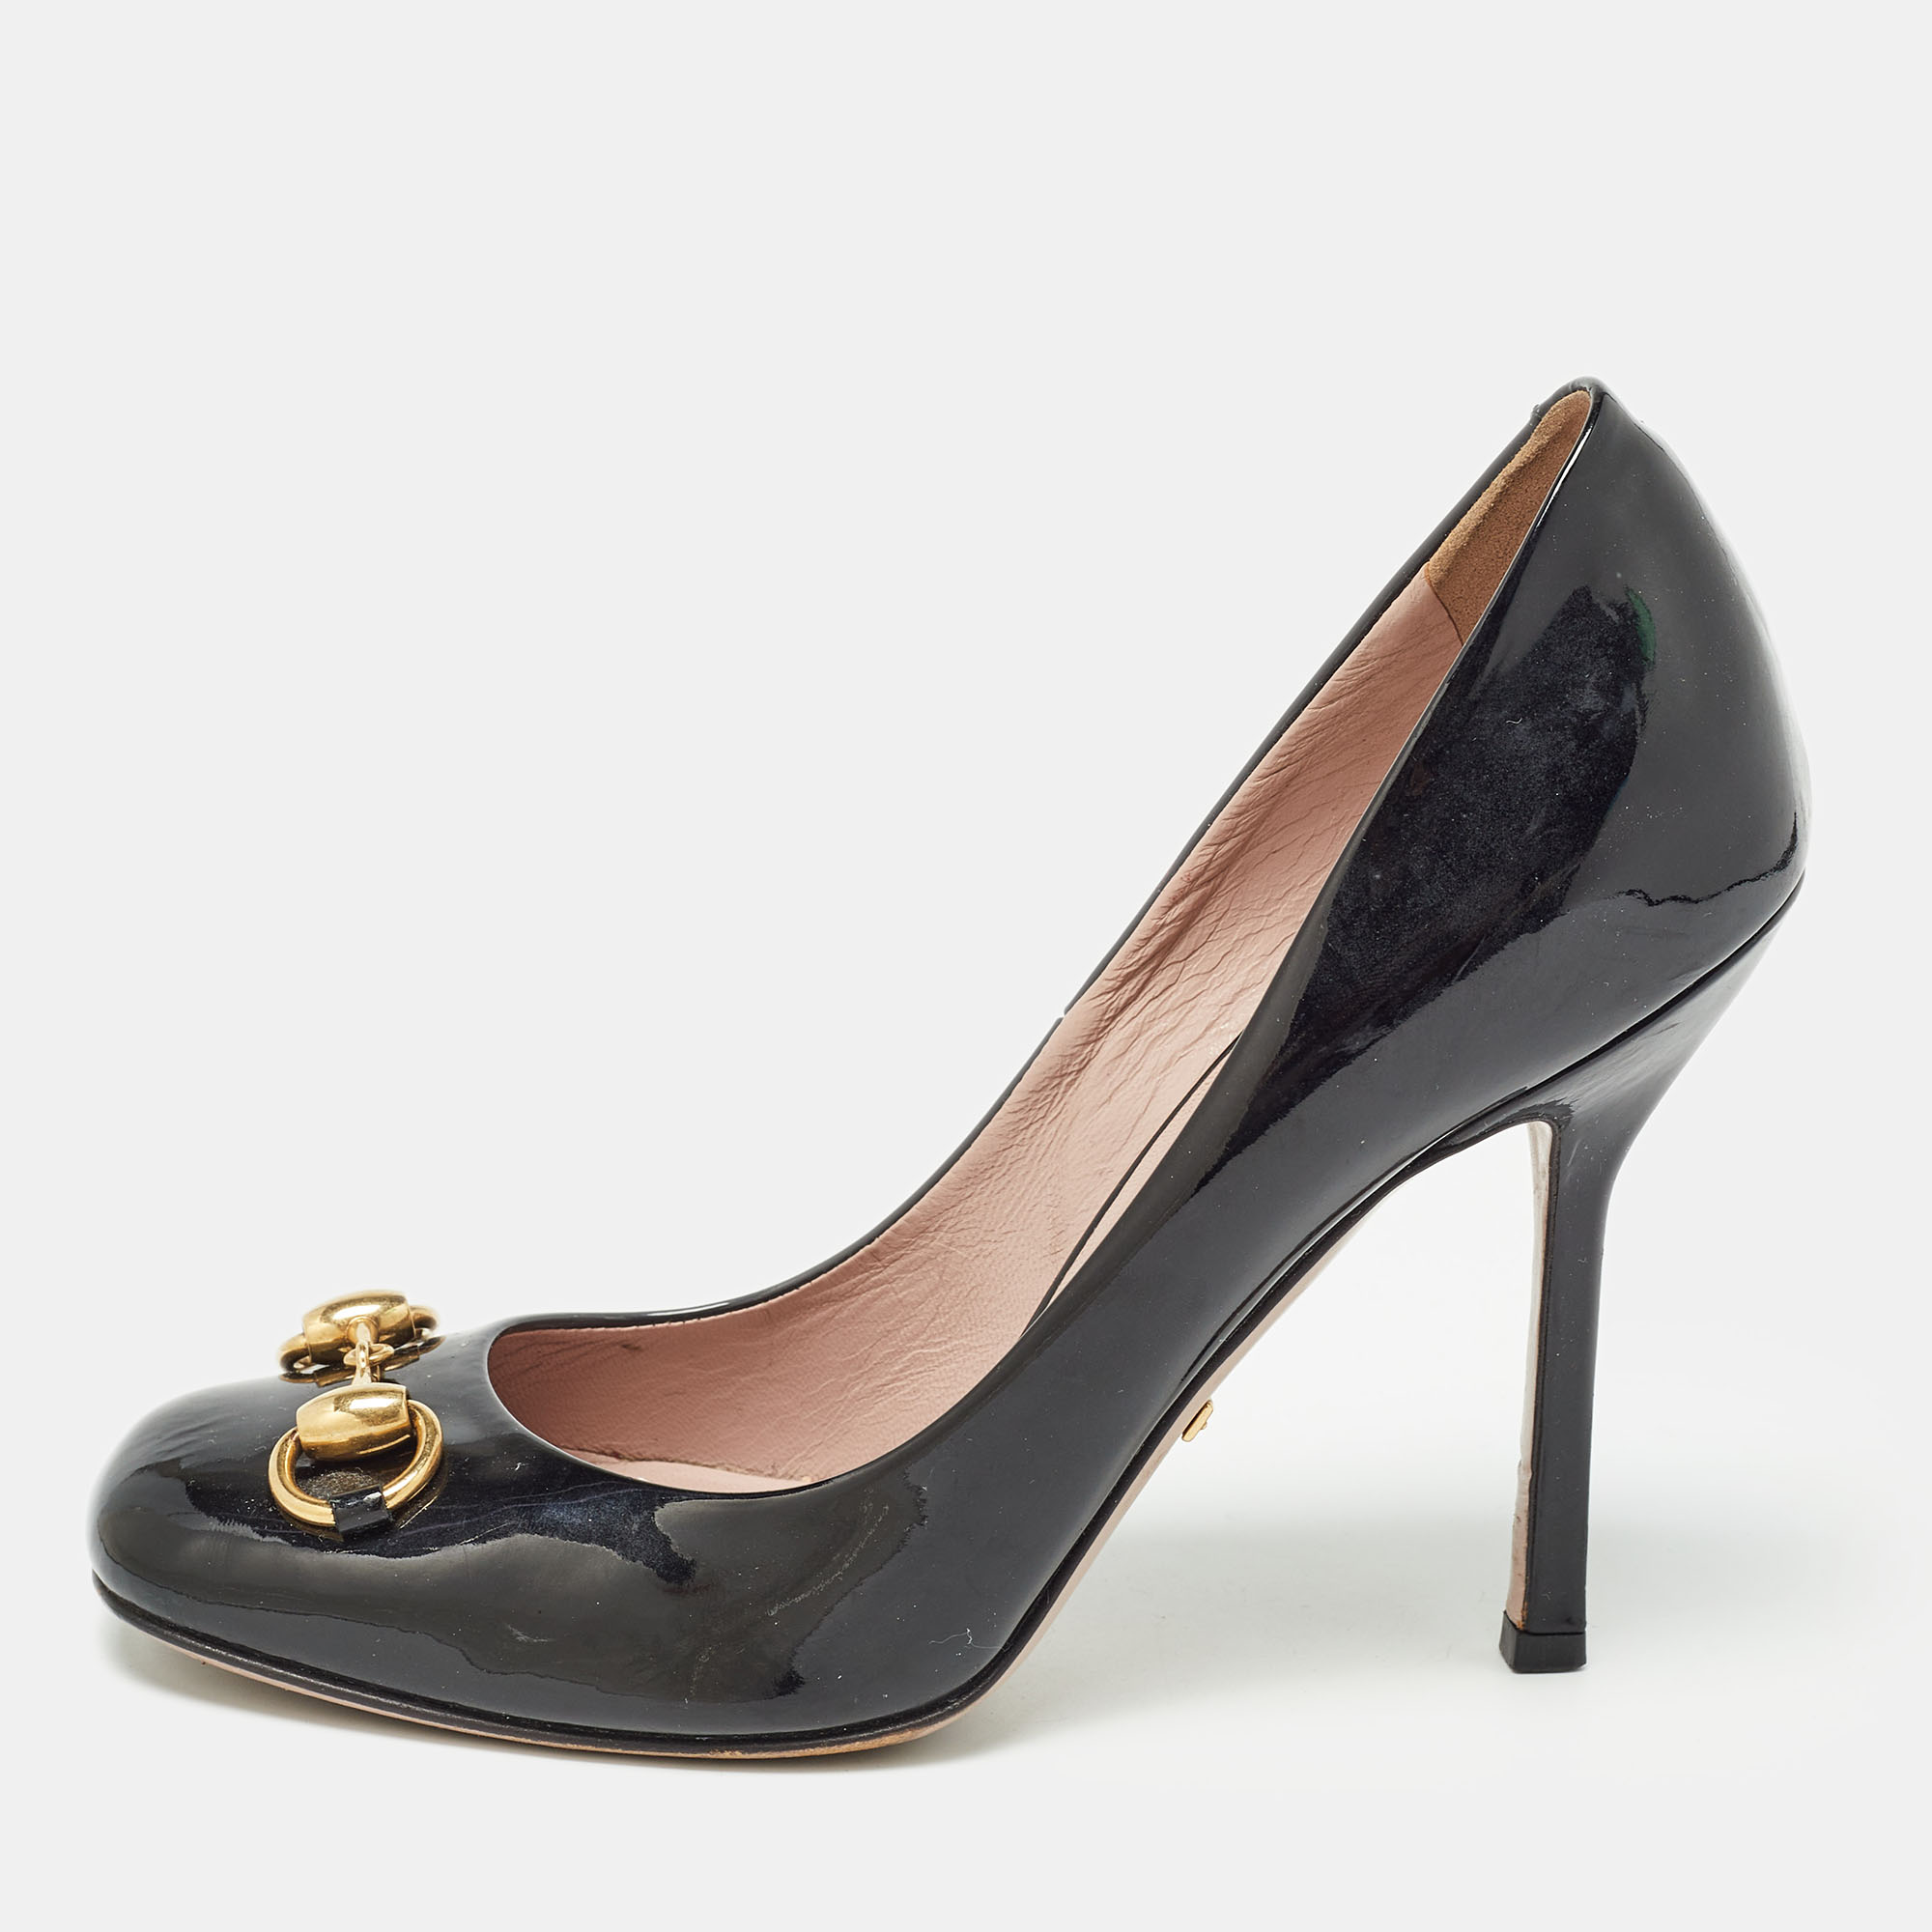 Discover footwear elegance with these Gucci womens pumps. Meticulously designed these heels marry fashion and comfort ensuring you shine in every setting.